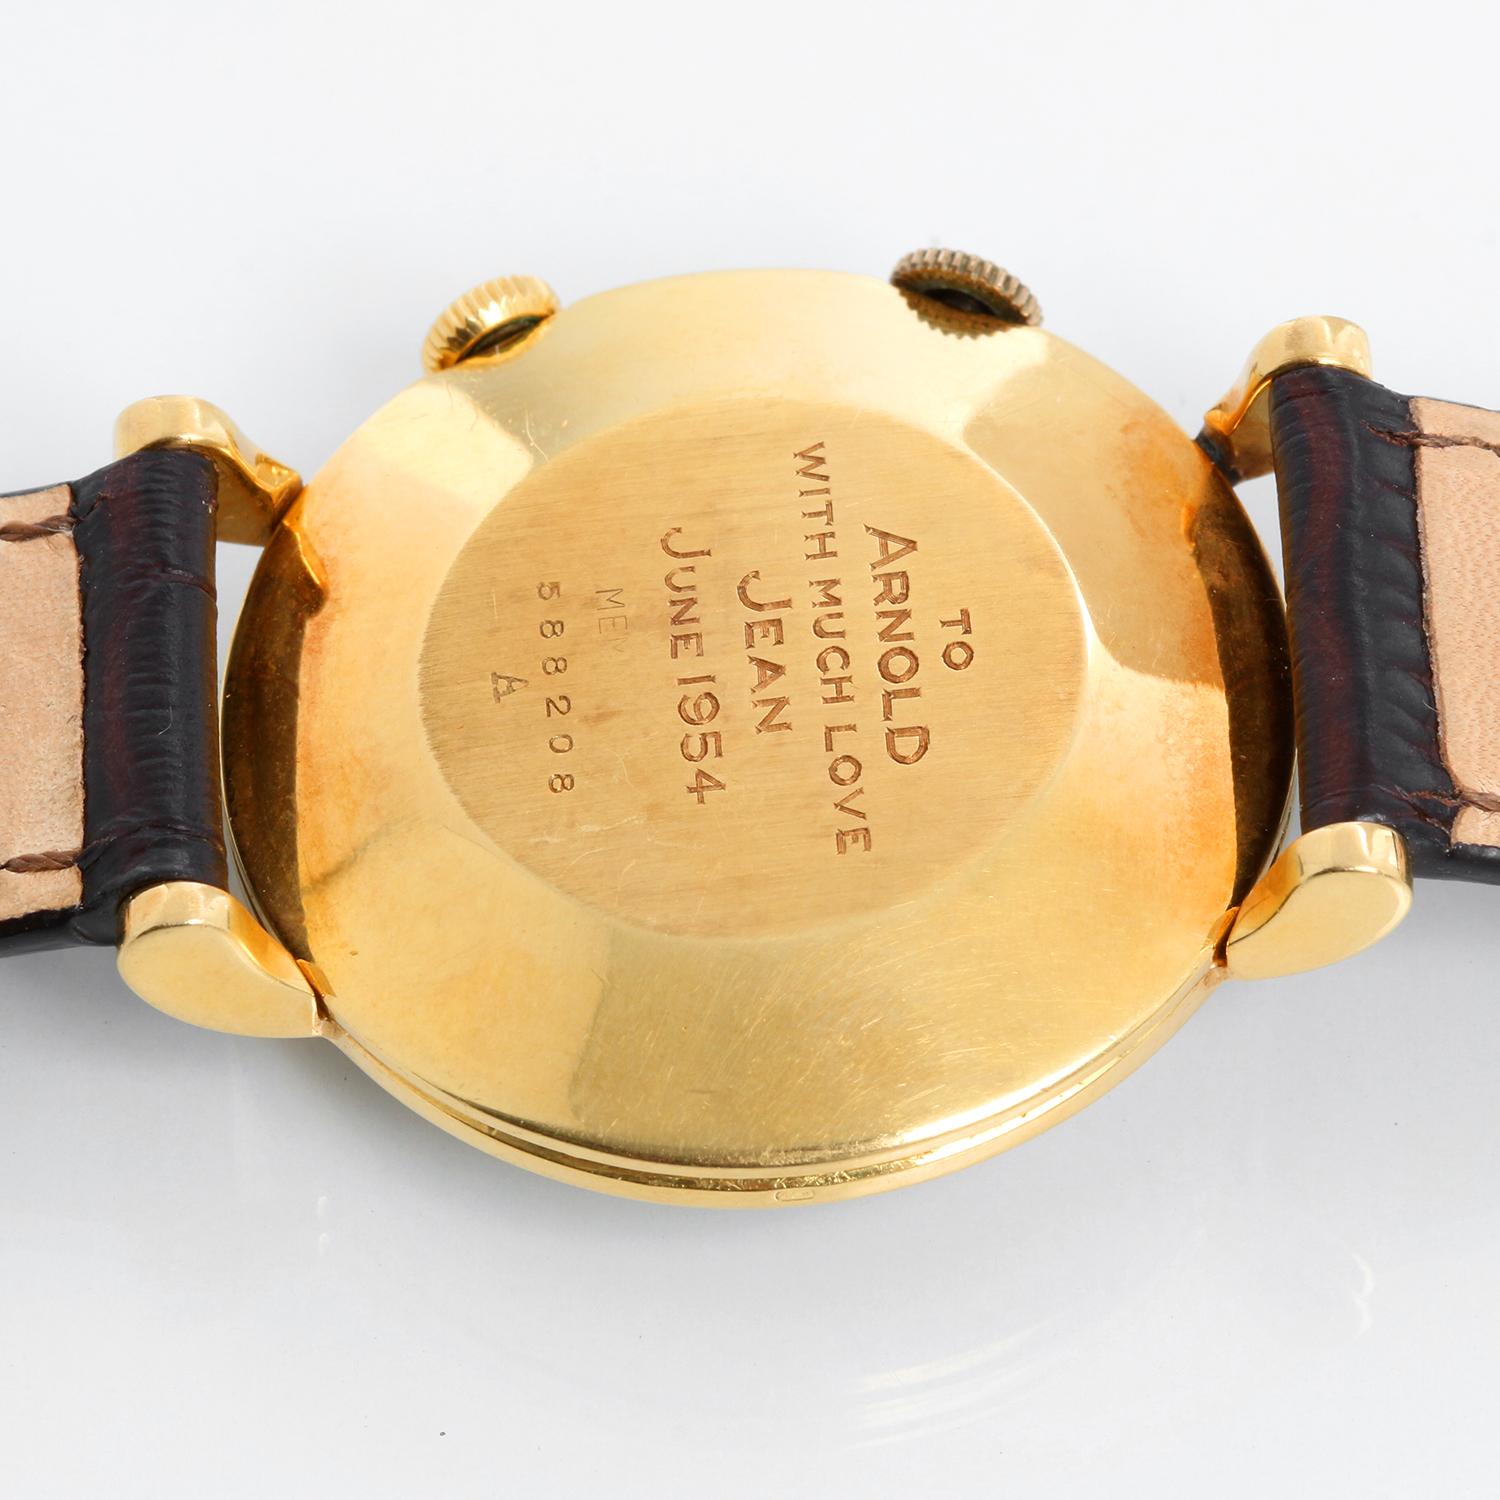 Cartier Extremely Rare 18k 'E.W.C' Alarm Watch with Hollywood Providence For Sale 1